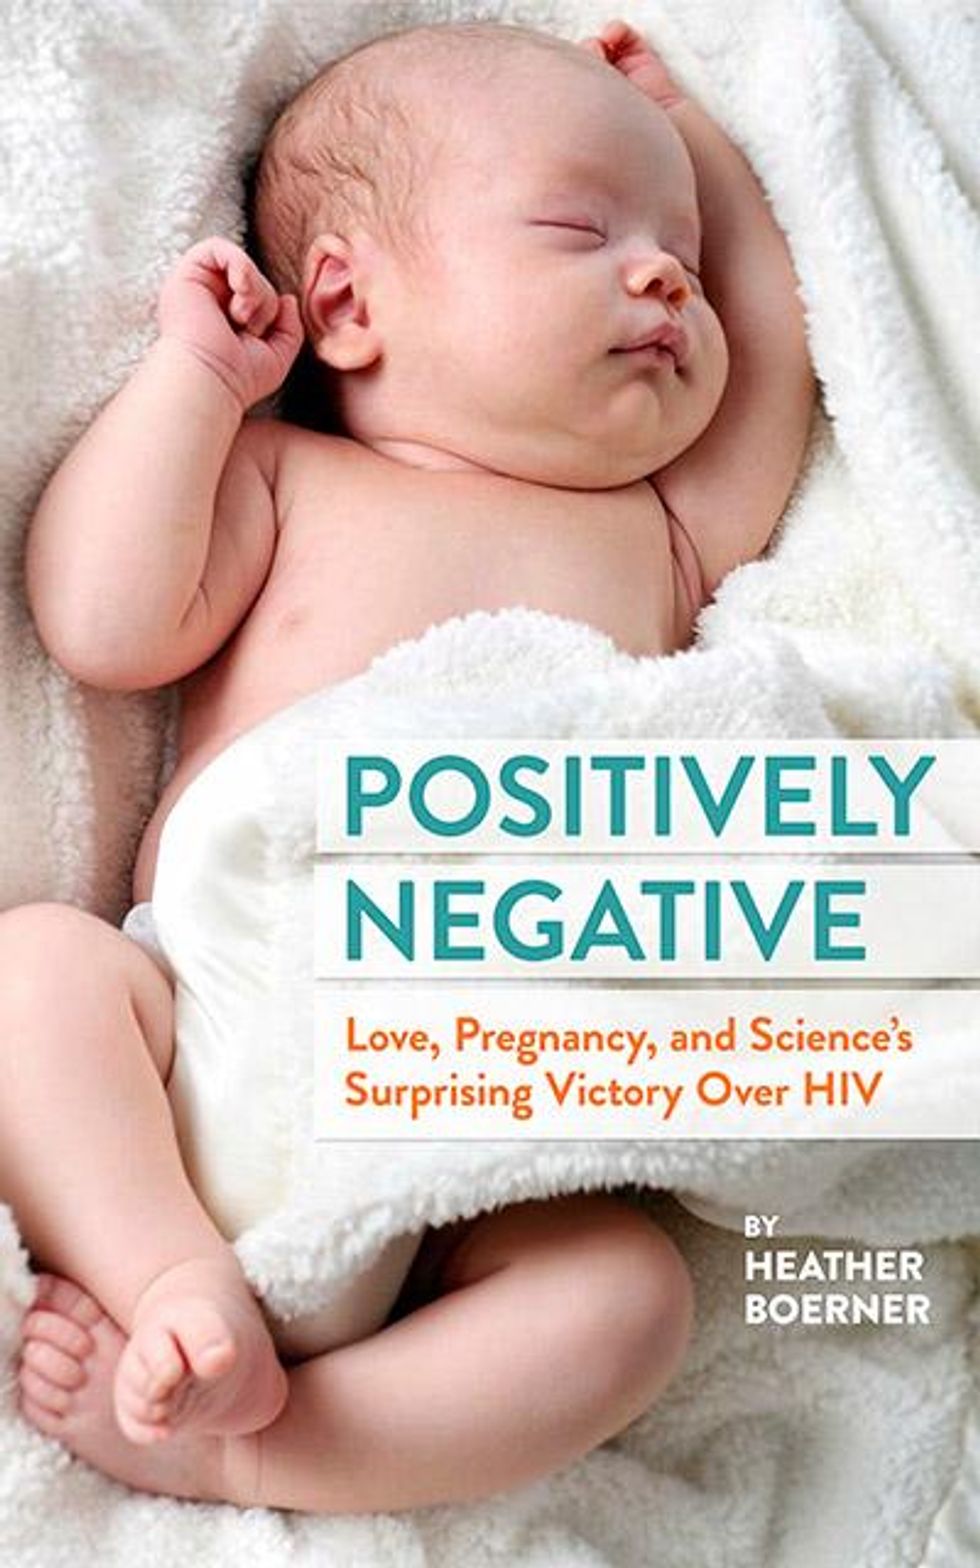 Love-pregnancy-and-science-book-x400d